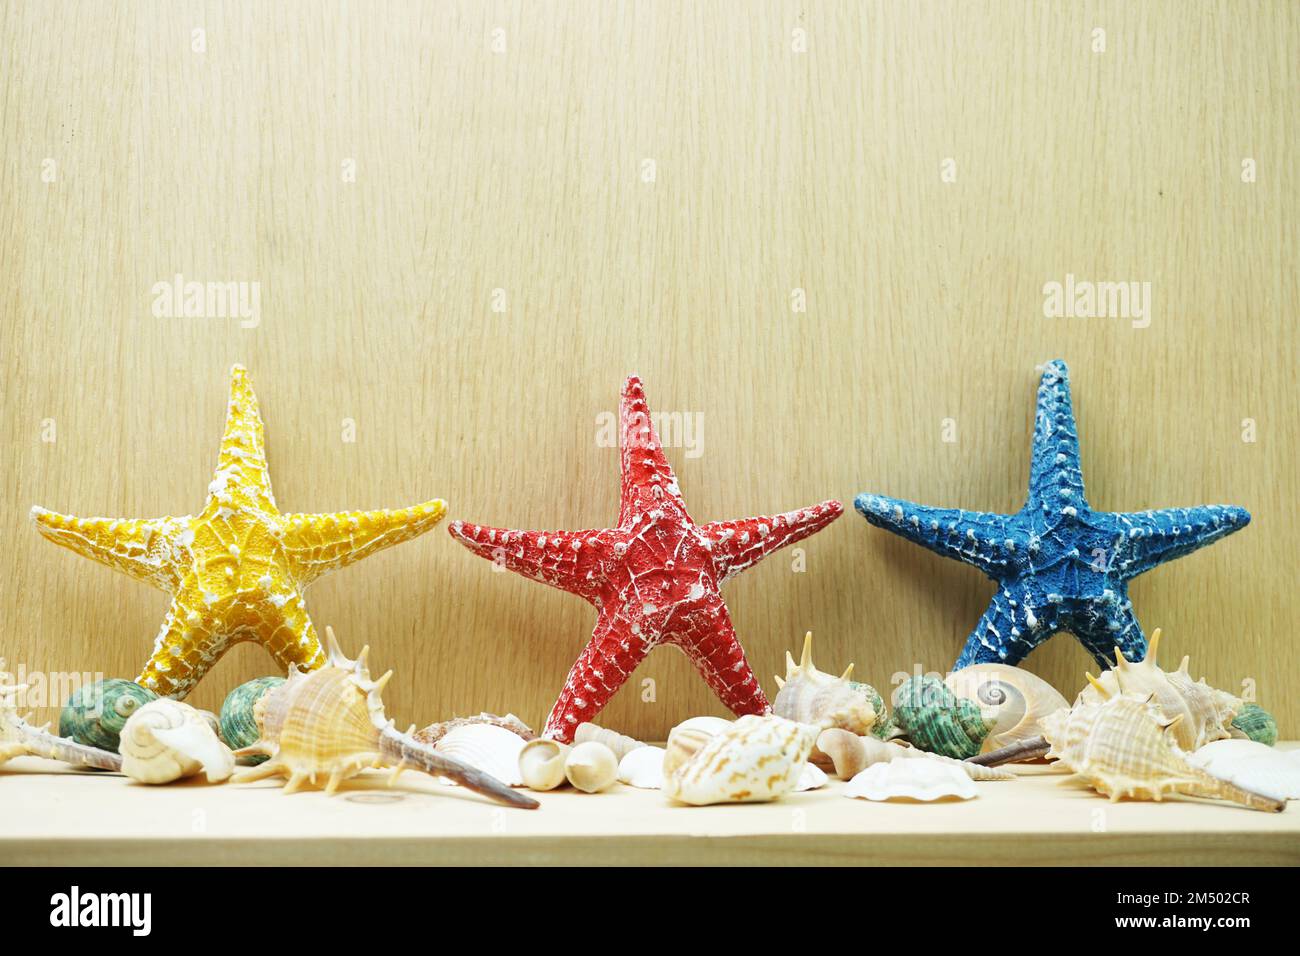 https://c8.alamy.com/comp/2M502CR/colorful-starfish-and-seashell-marine-decoration-with-space-copy-on-wooden-background-2M502CR.jpg